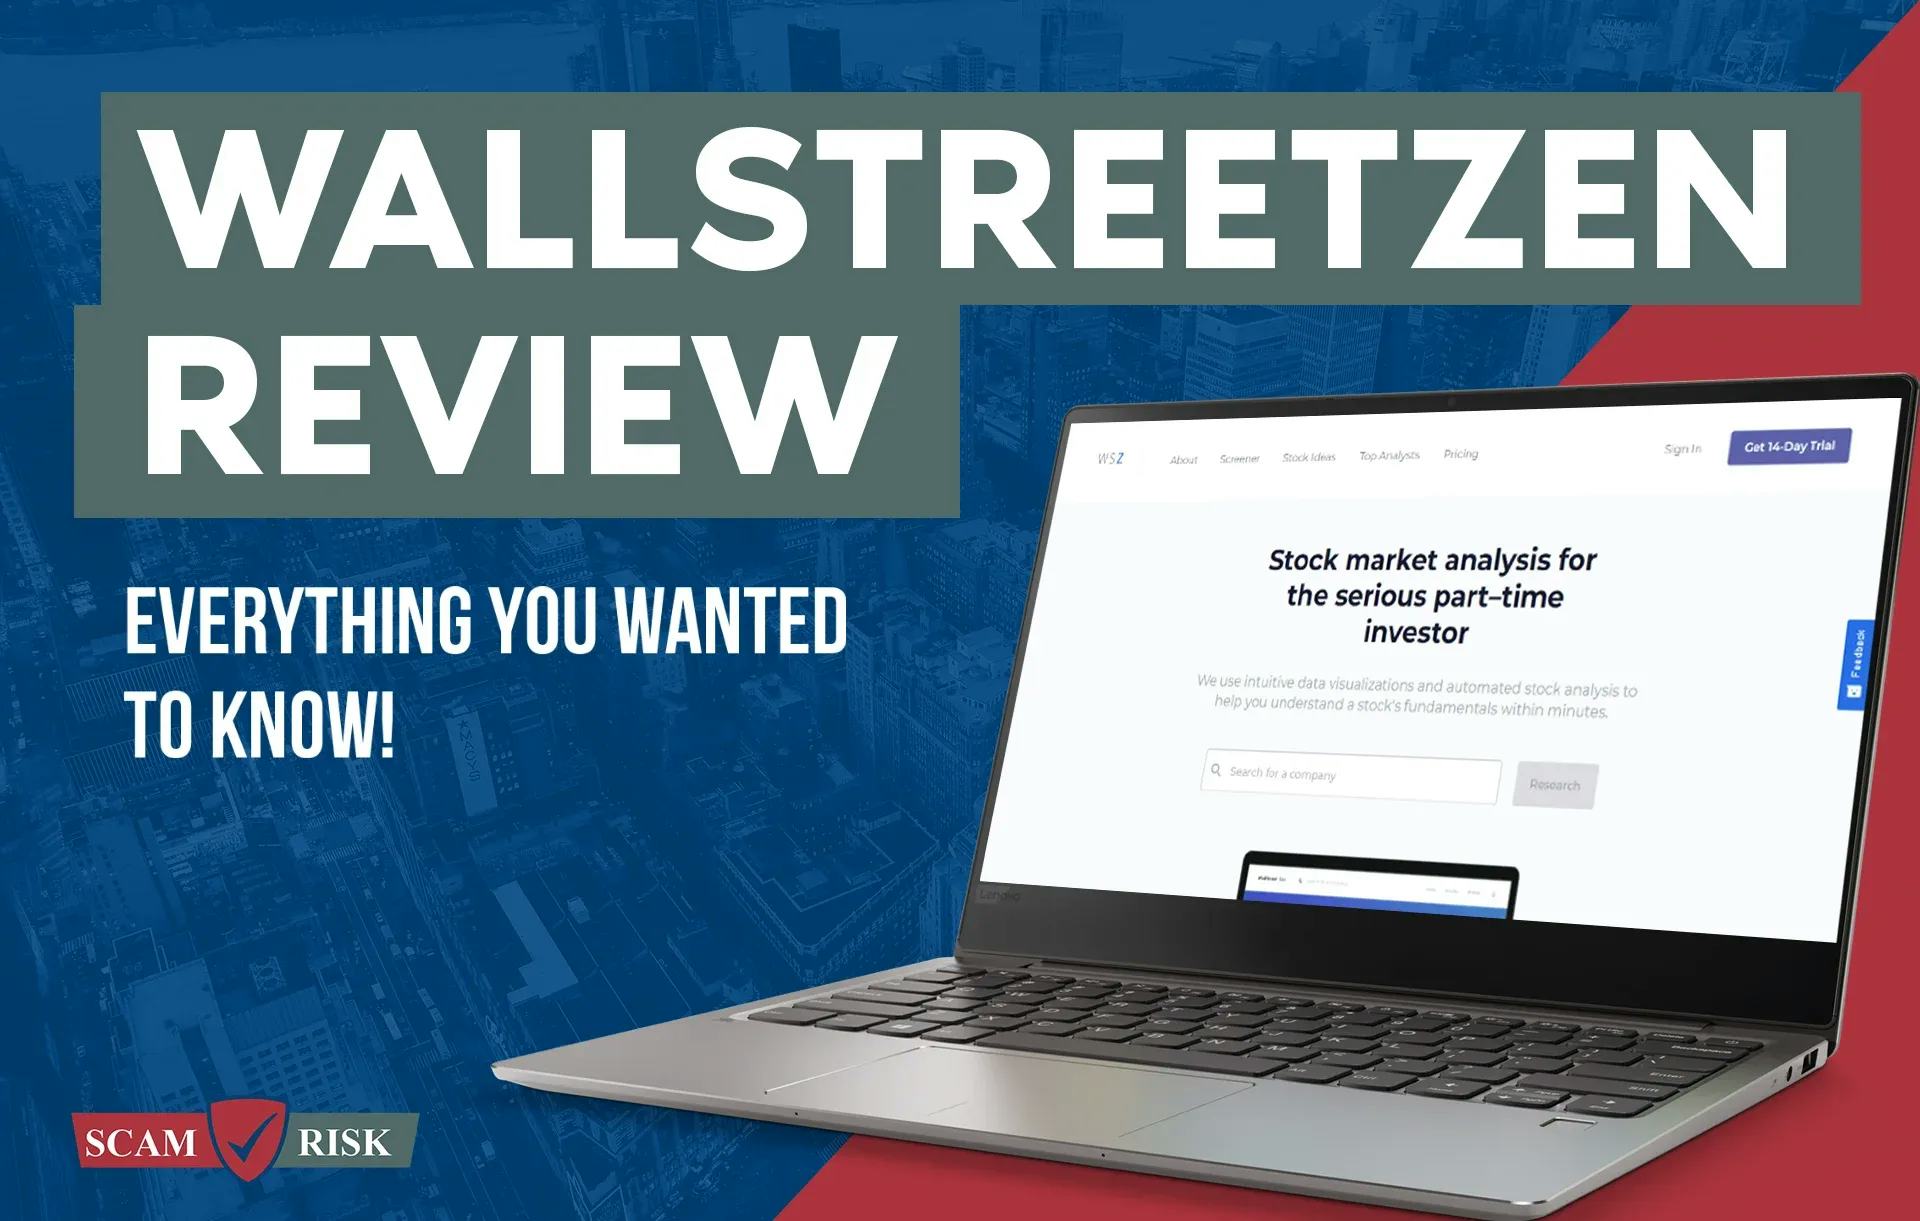 WallStreetZen Review ([year] Update): Everything You Wanted To Know!